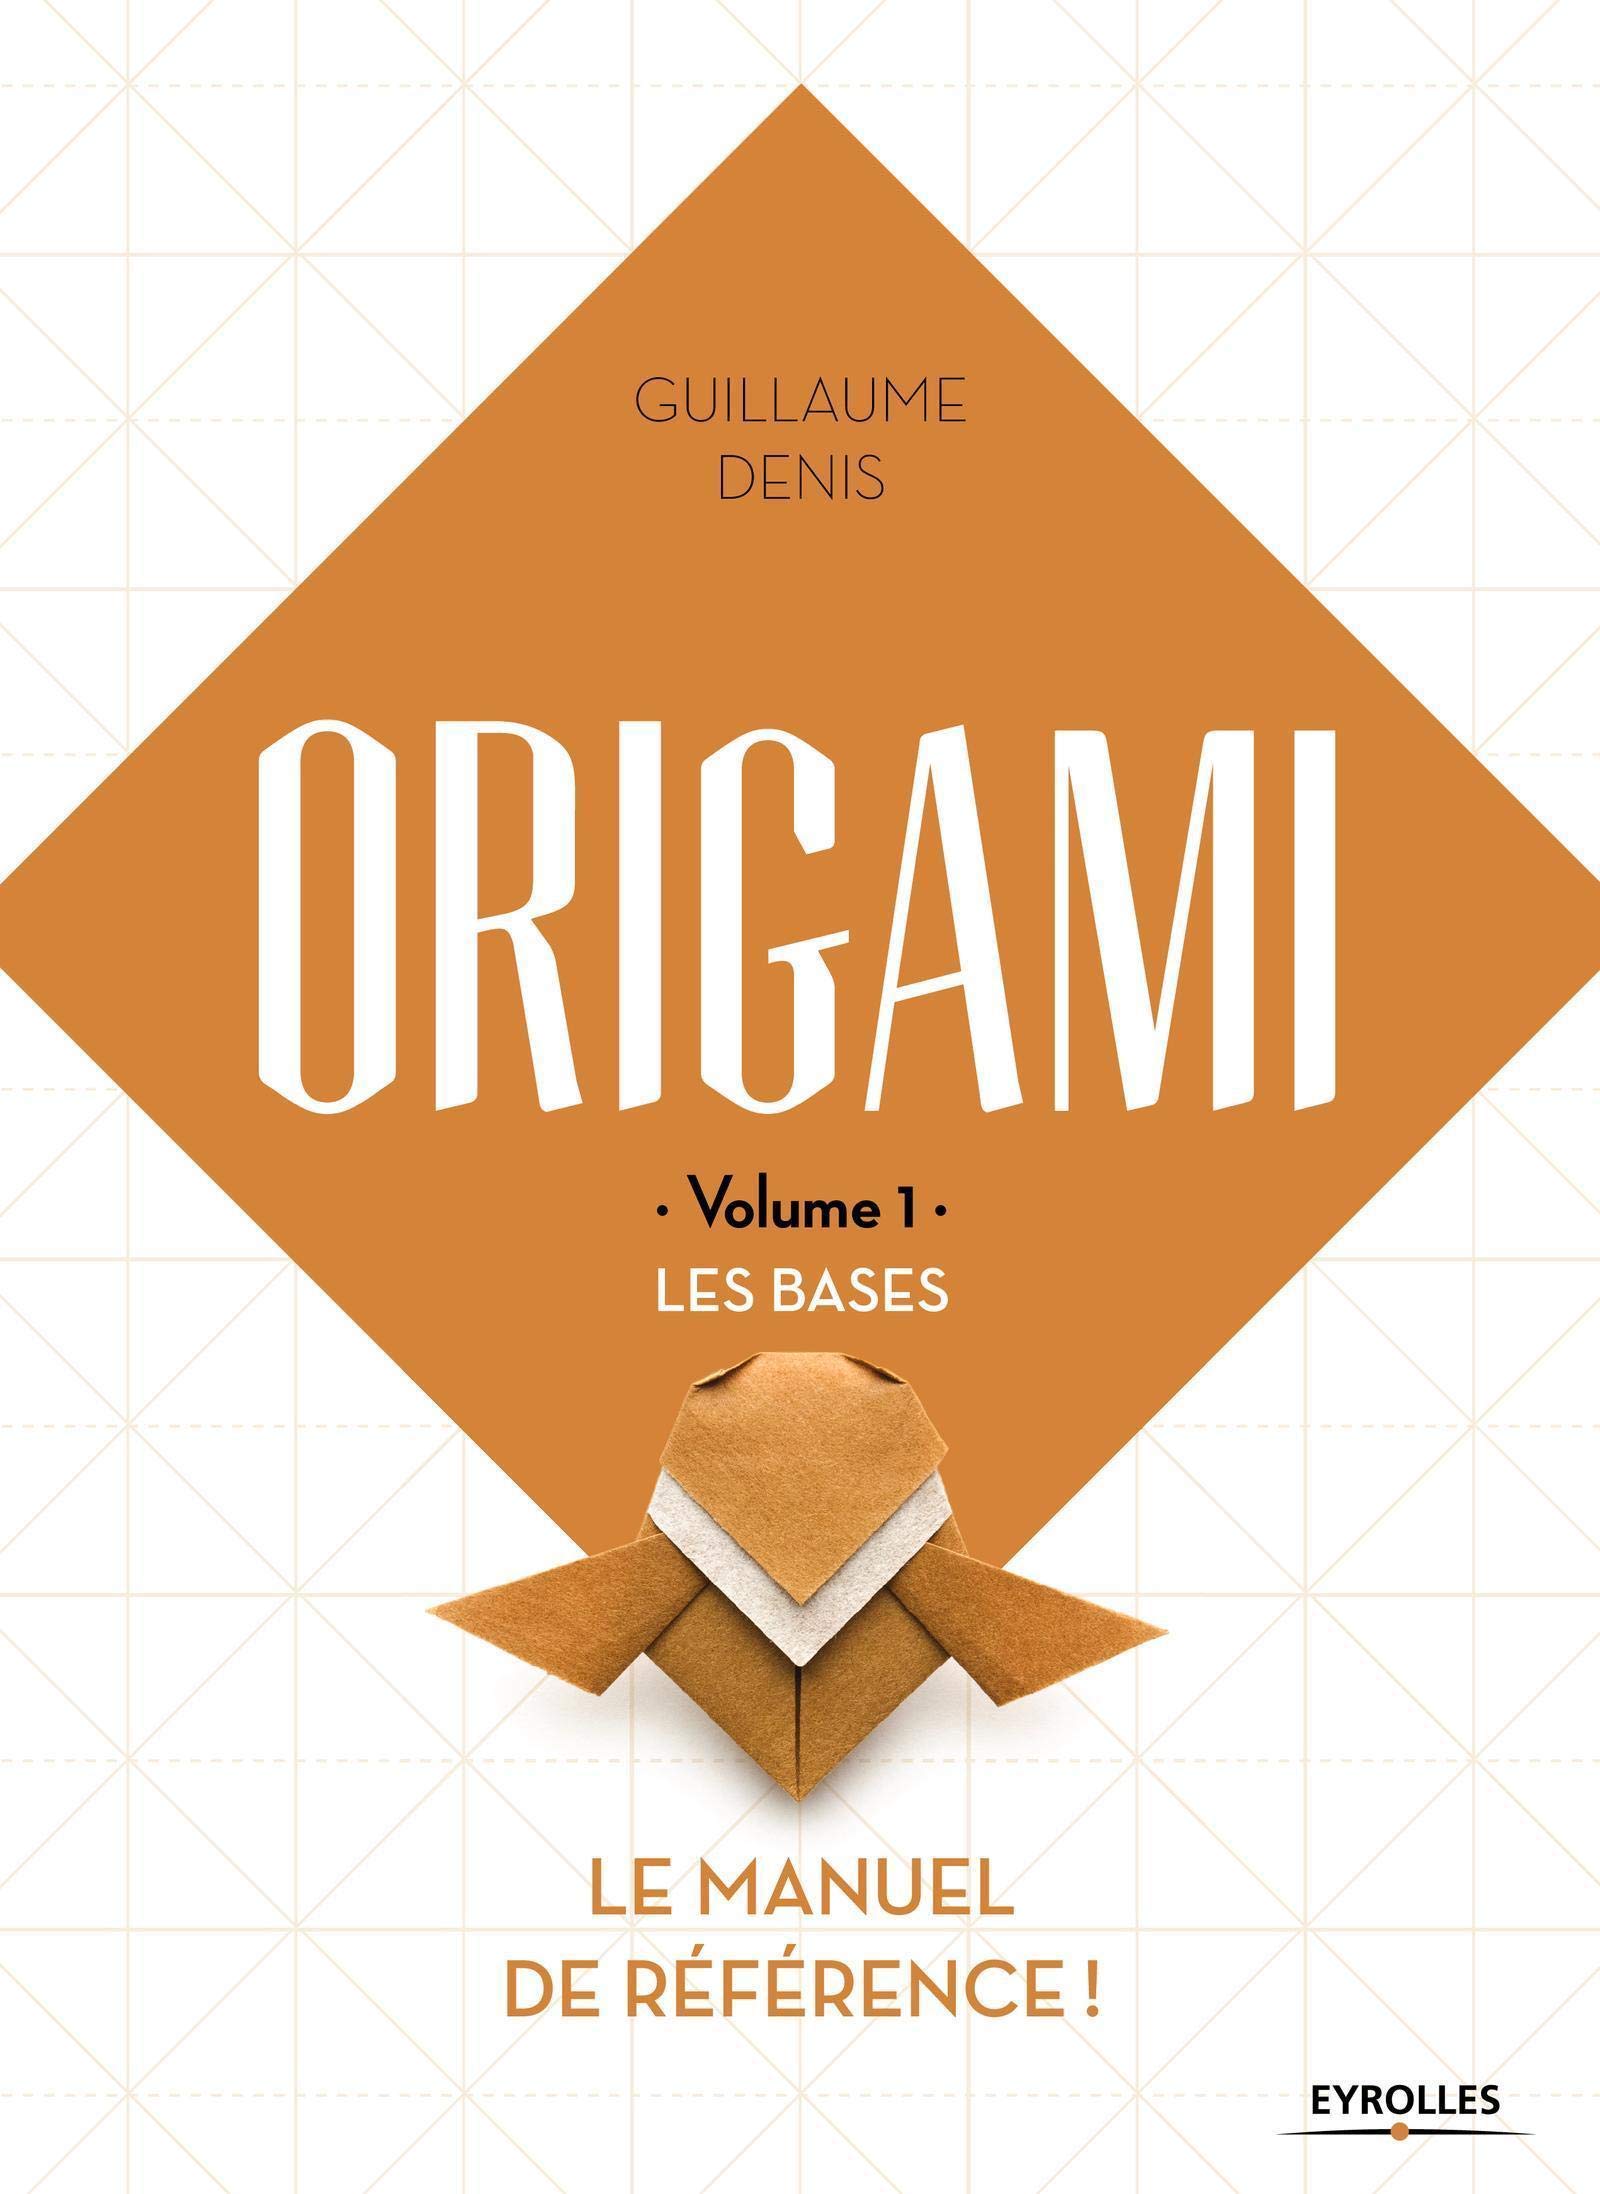 ORIGAMI - Volume 1 - LES BASES : page 251.